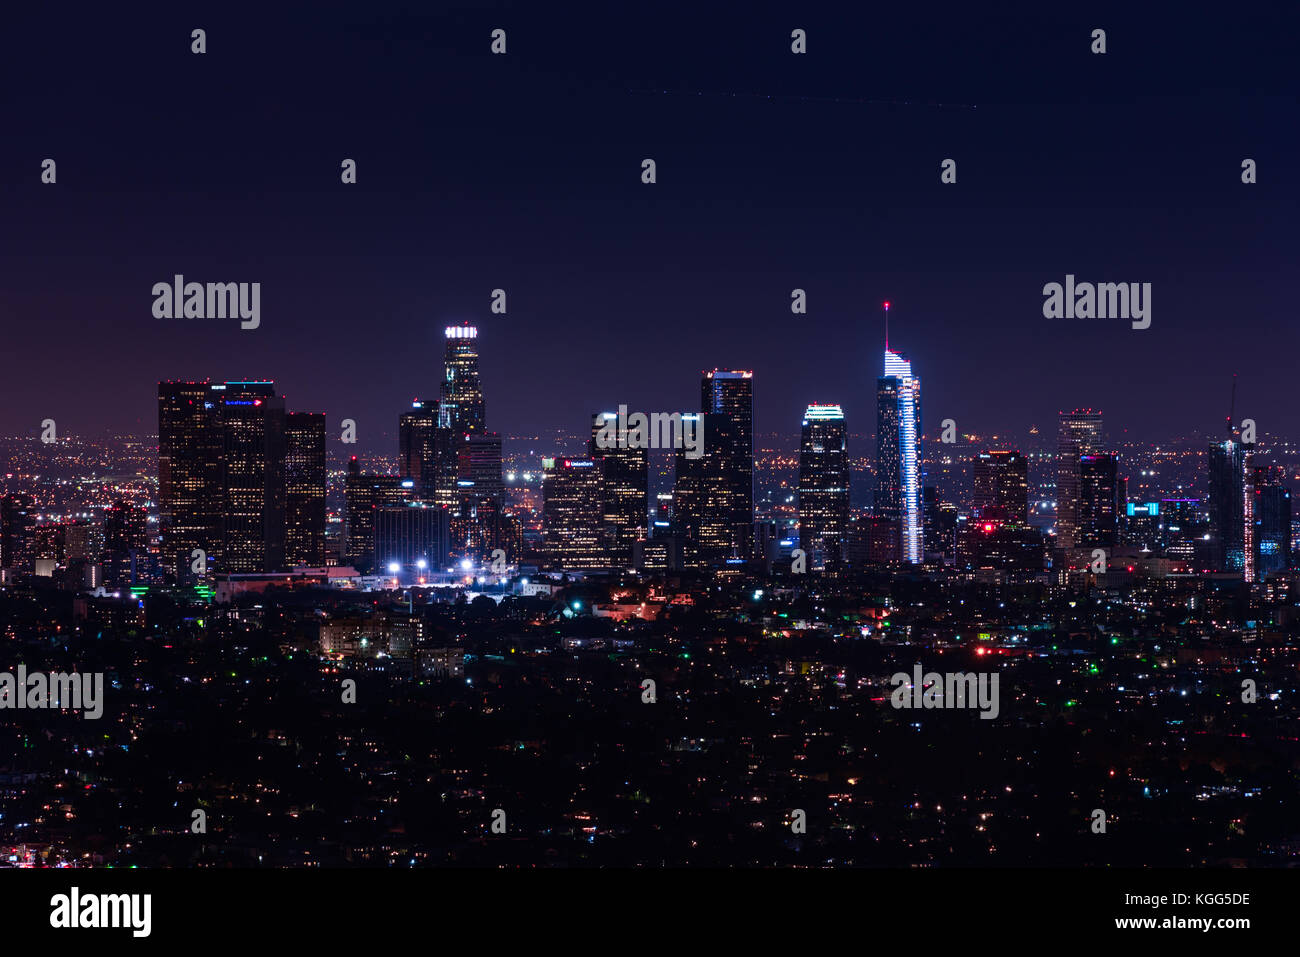 Los angeles city at night Banque D'Images